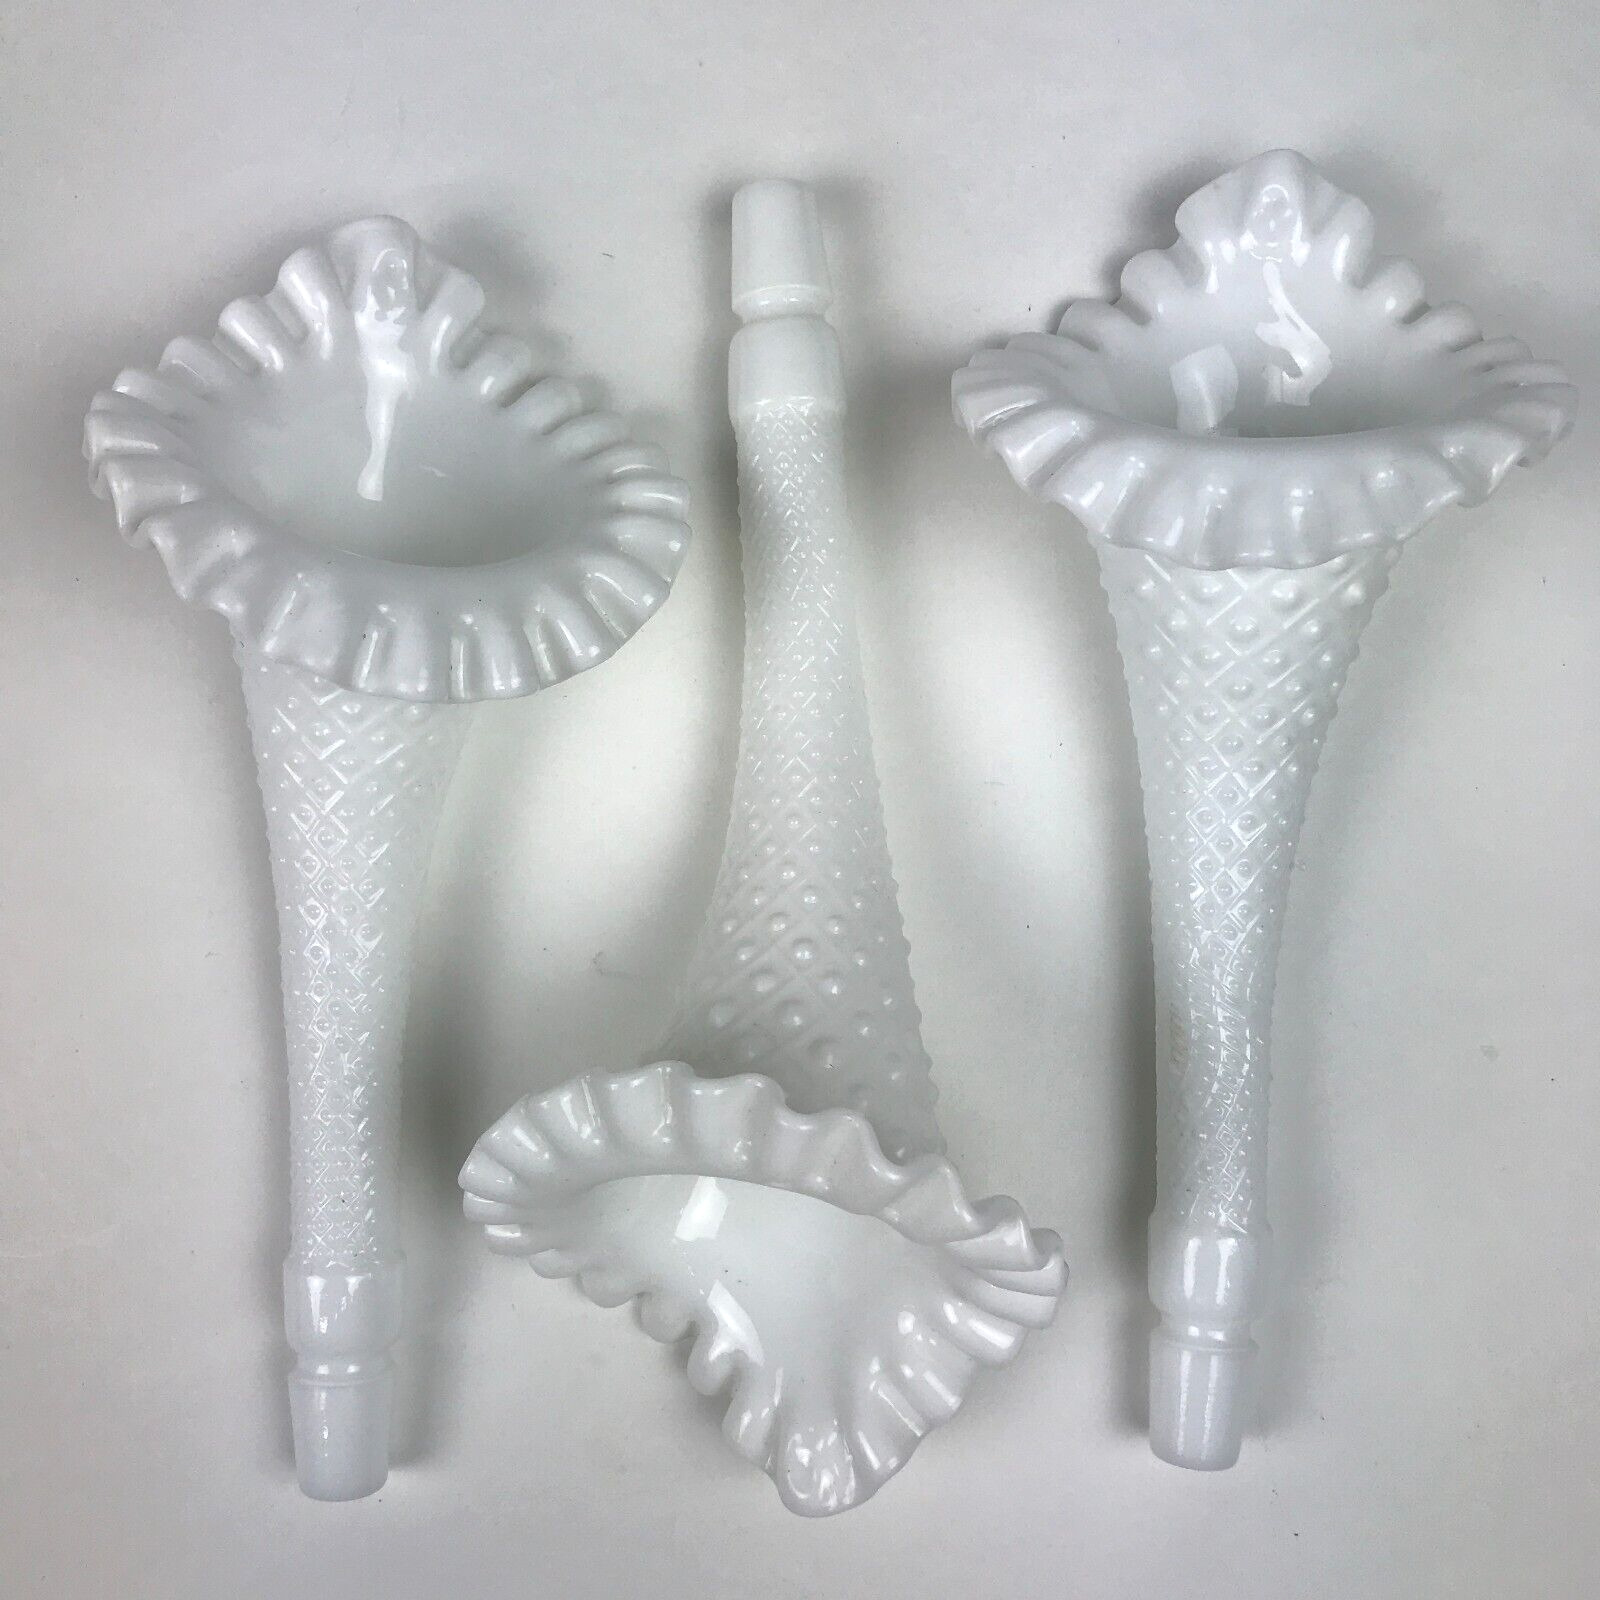 Fenton White Milk Glass Epergne Diamond and Lace Vases Replacement Horns Lot 3